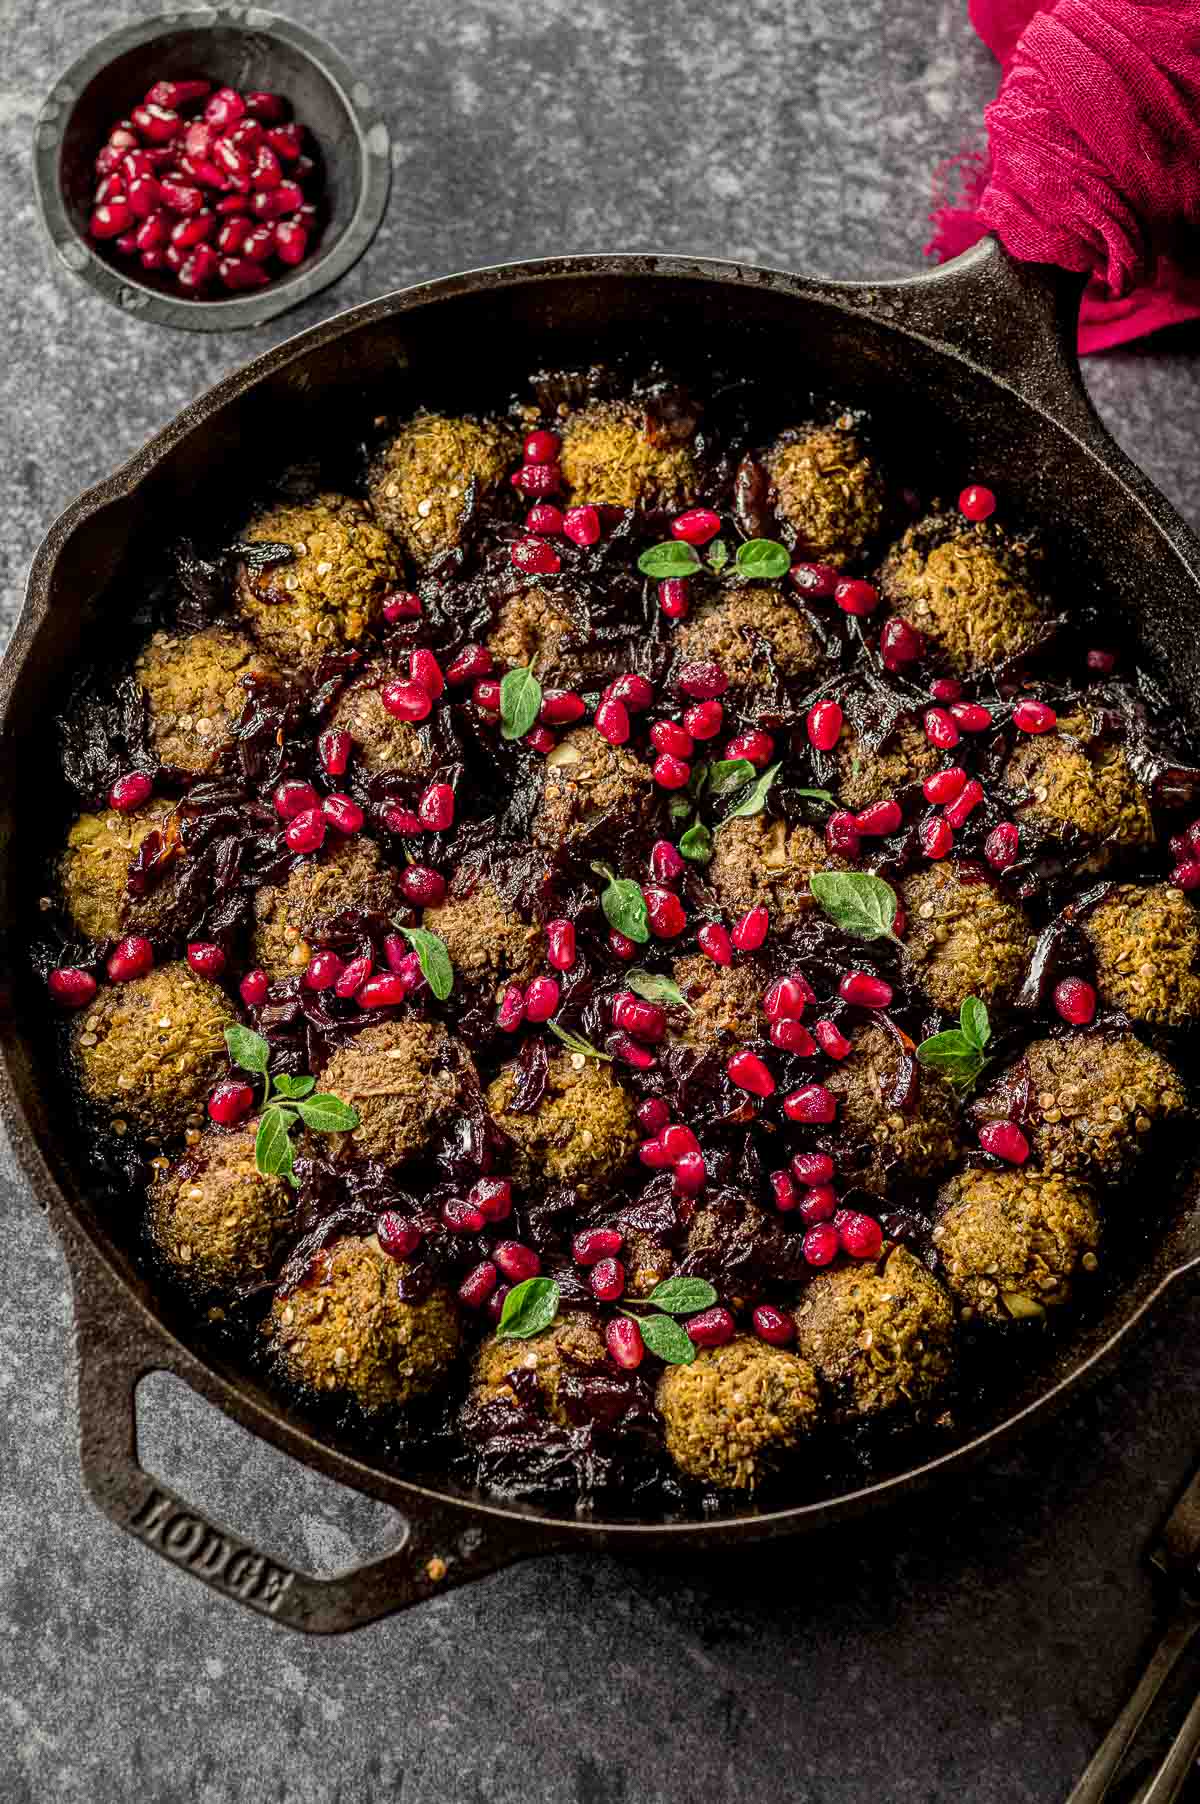 Overhead view of a cast iron pan with eggplant meatballs topped with pomegranate seeds